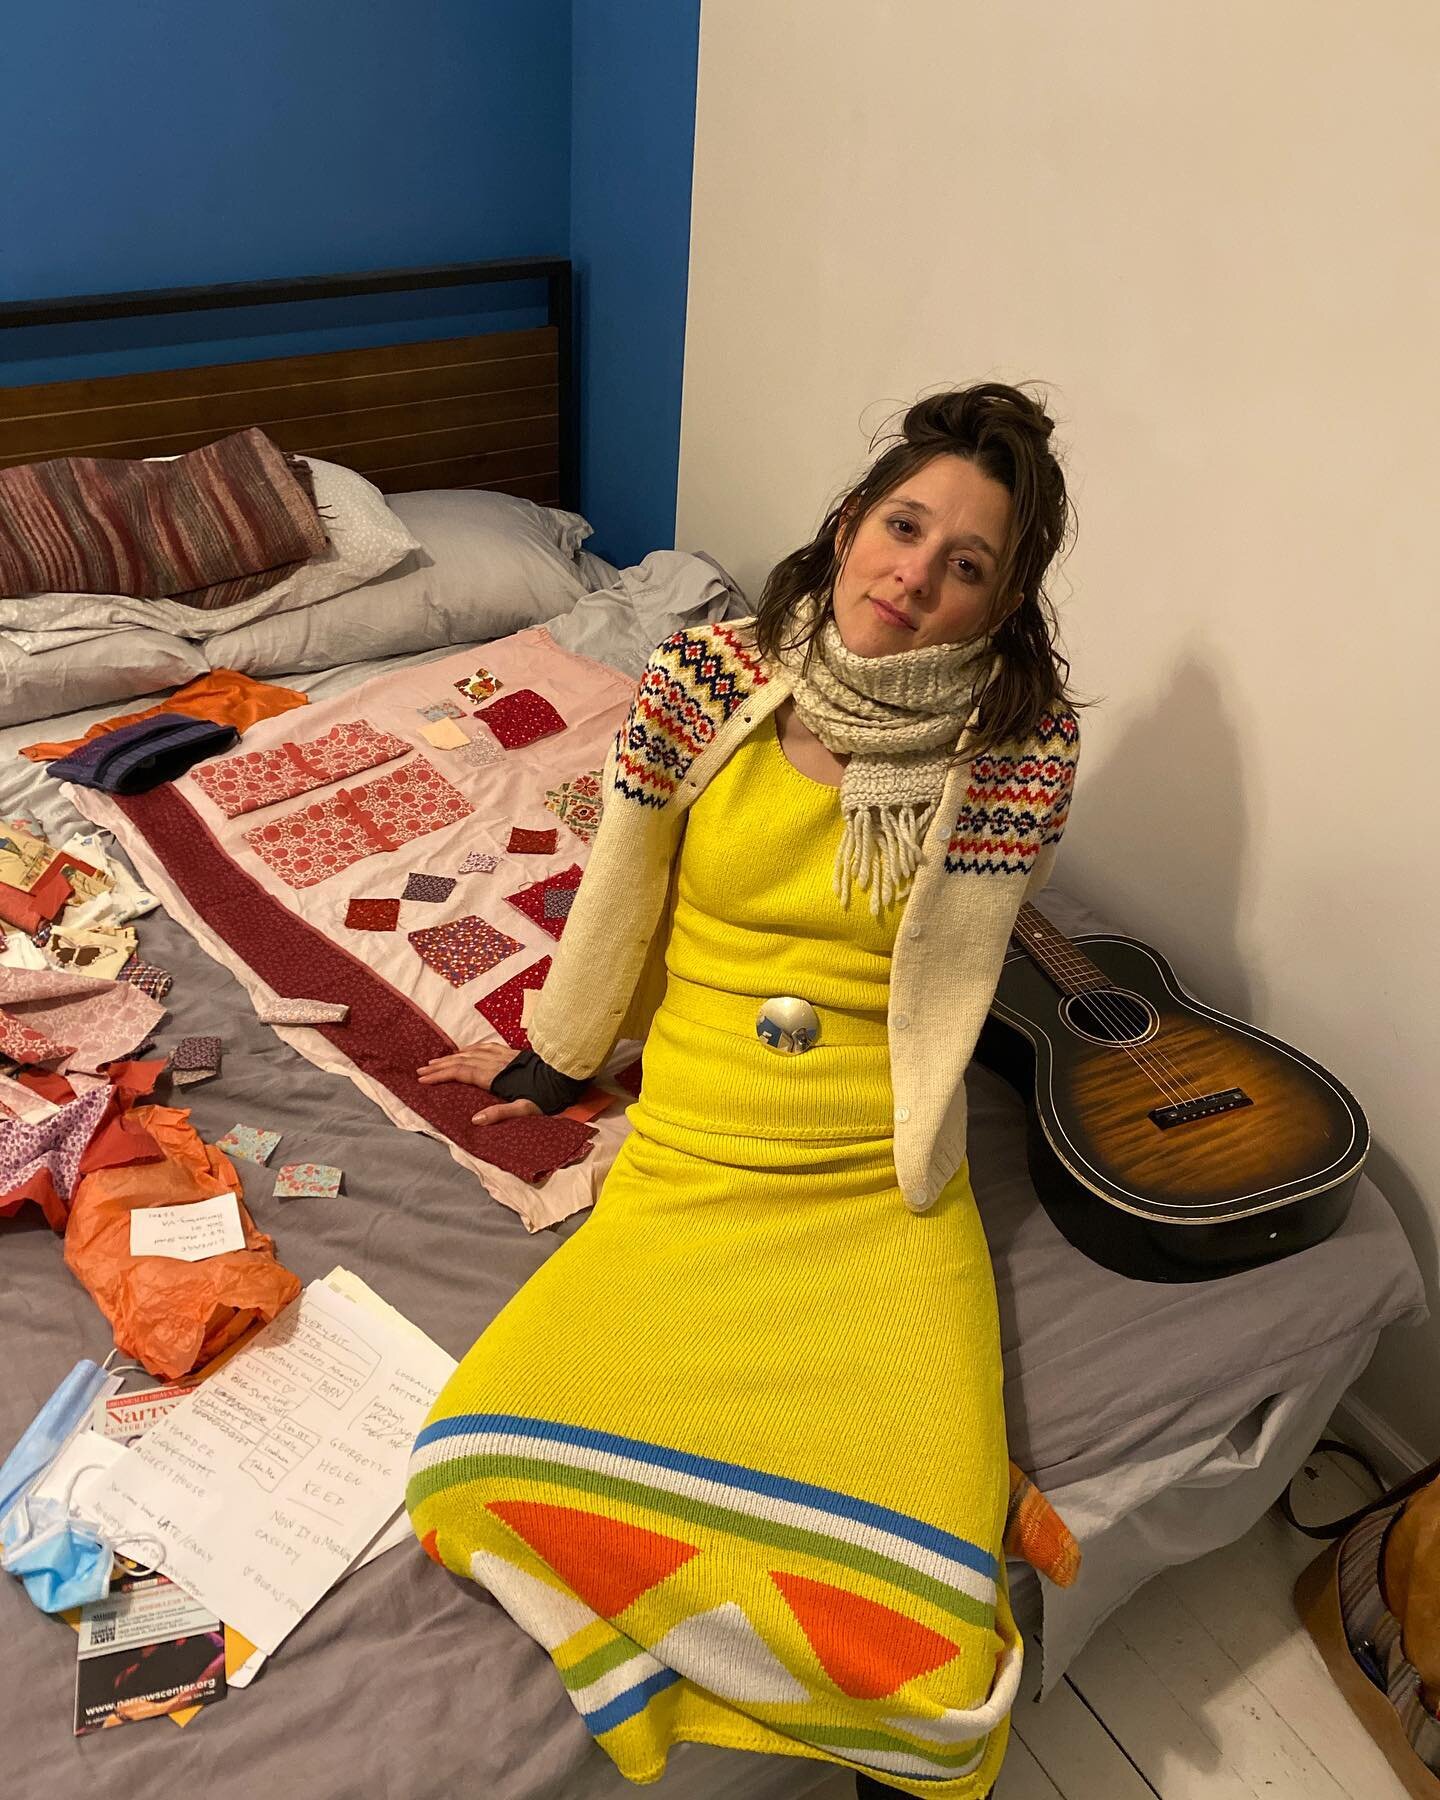 Remembering this pre-show or maybe post-show moment with the little quilt I am working on laid out behind me, the old parlor guitar we found in a pawn shop and my exhausted, proud, emotionally-zapped face. 

This was the second to last night of this 